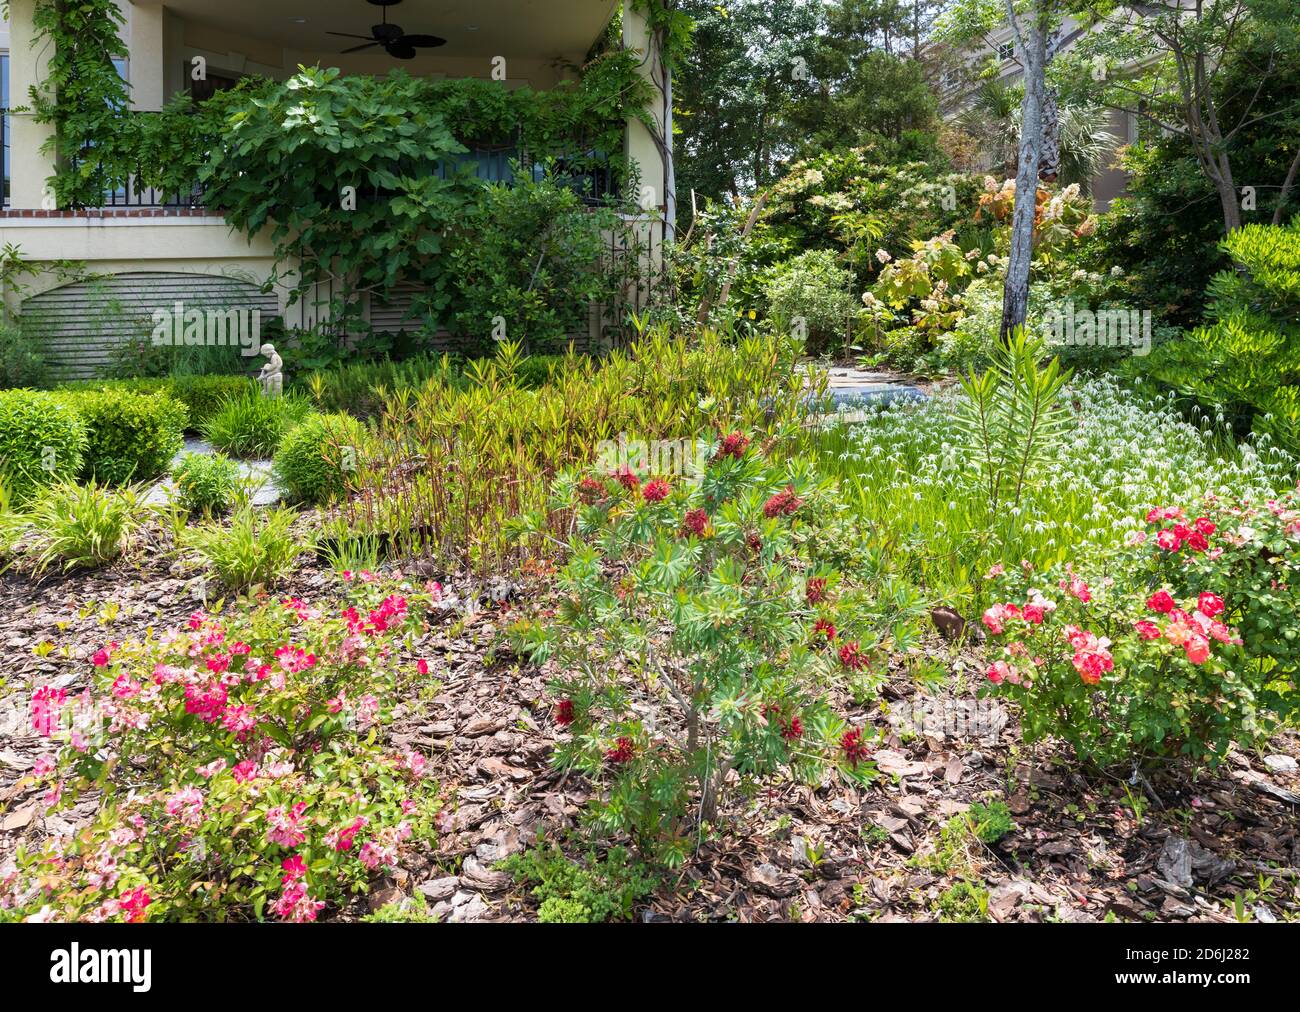 A South Carolina garden in May. White star grass and roses with bottlebrush.  In the background is a herb garden with a large fig tree. Stock Photo